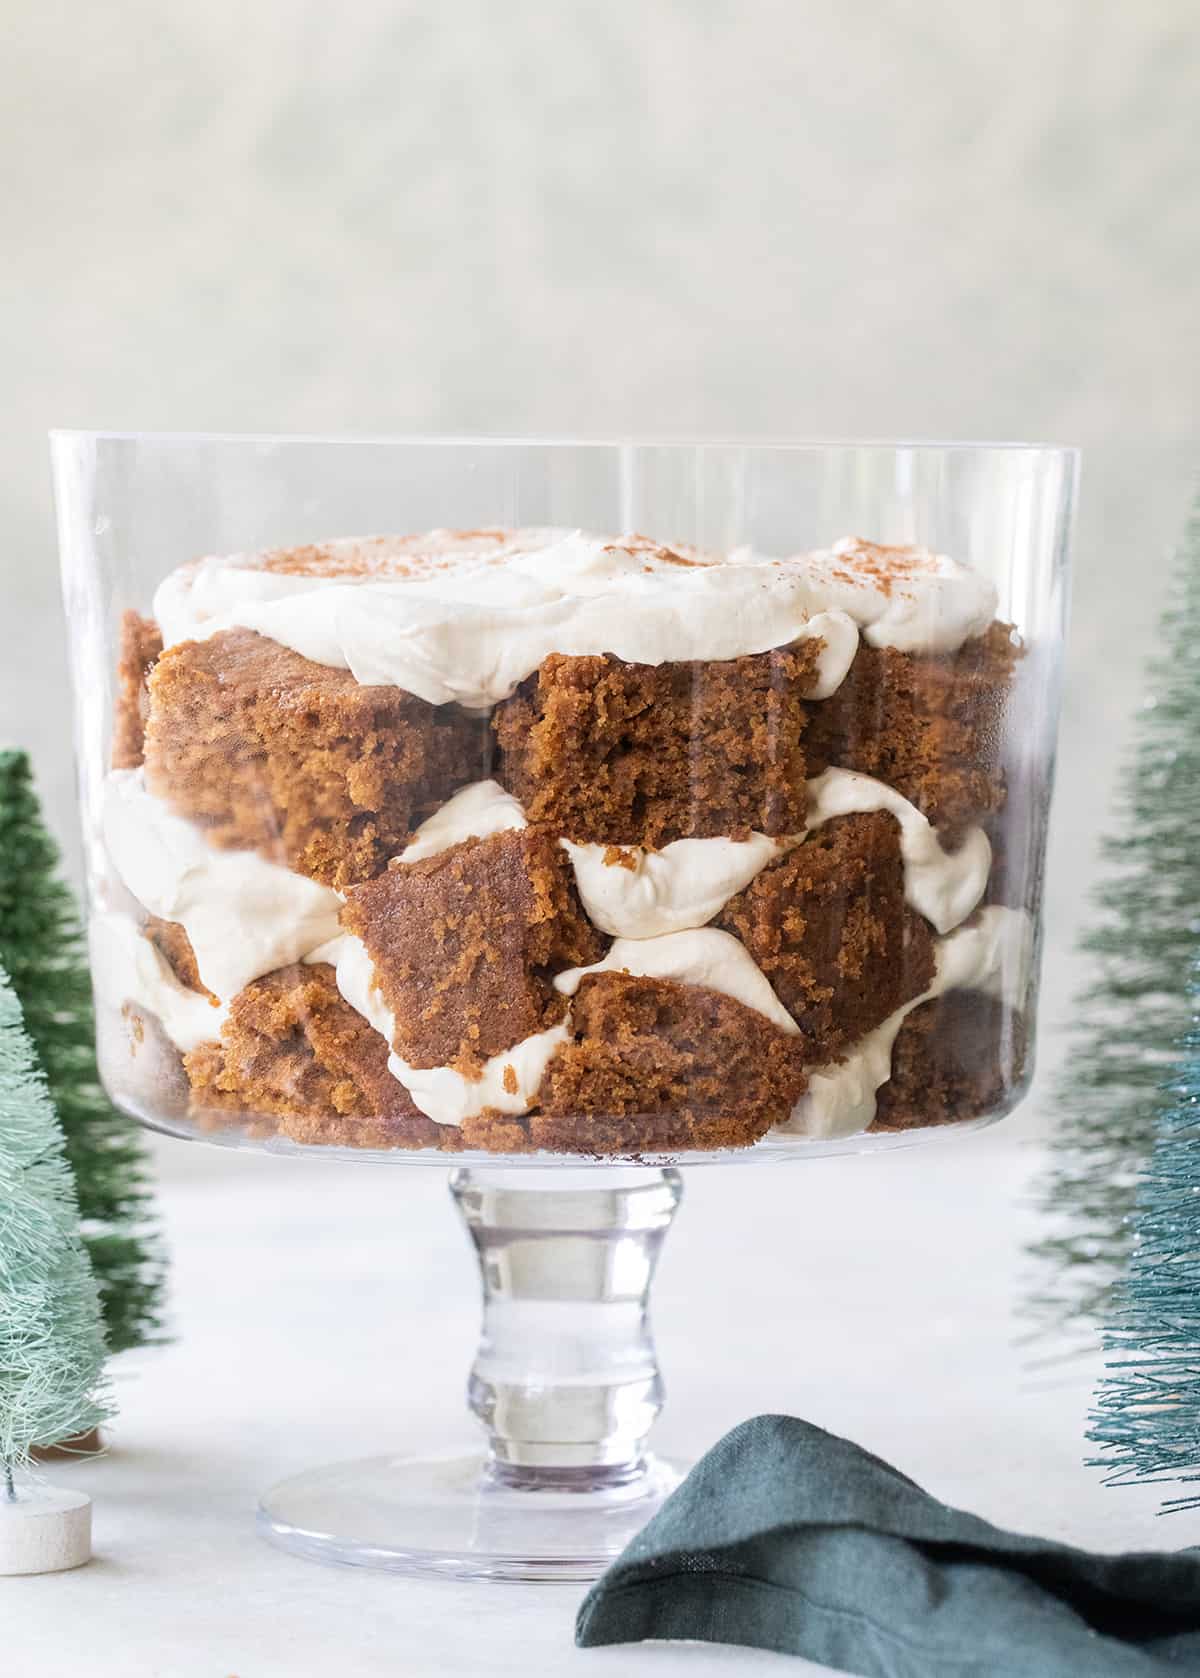 Gingerbread trifle recipe in a clear trifle bowl.